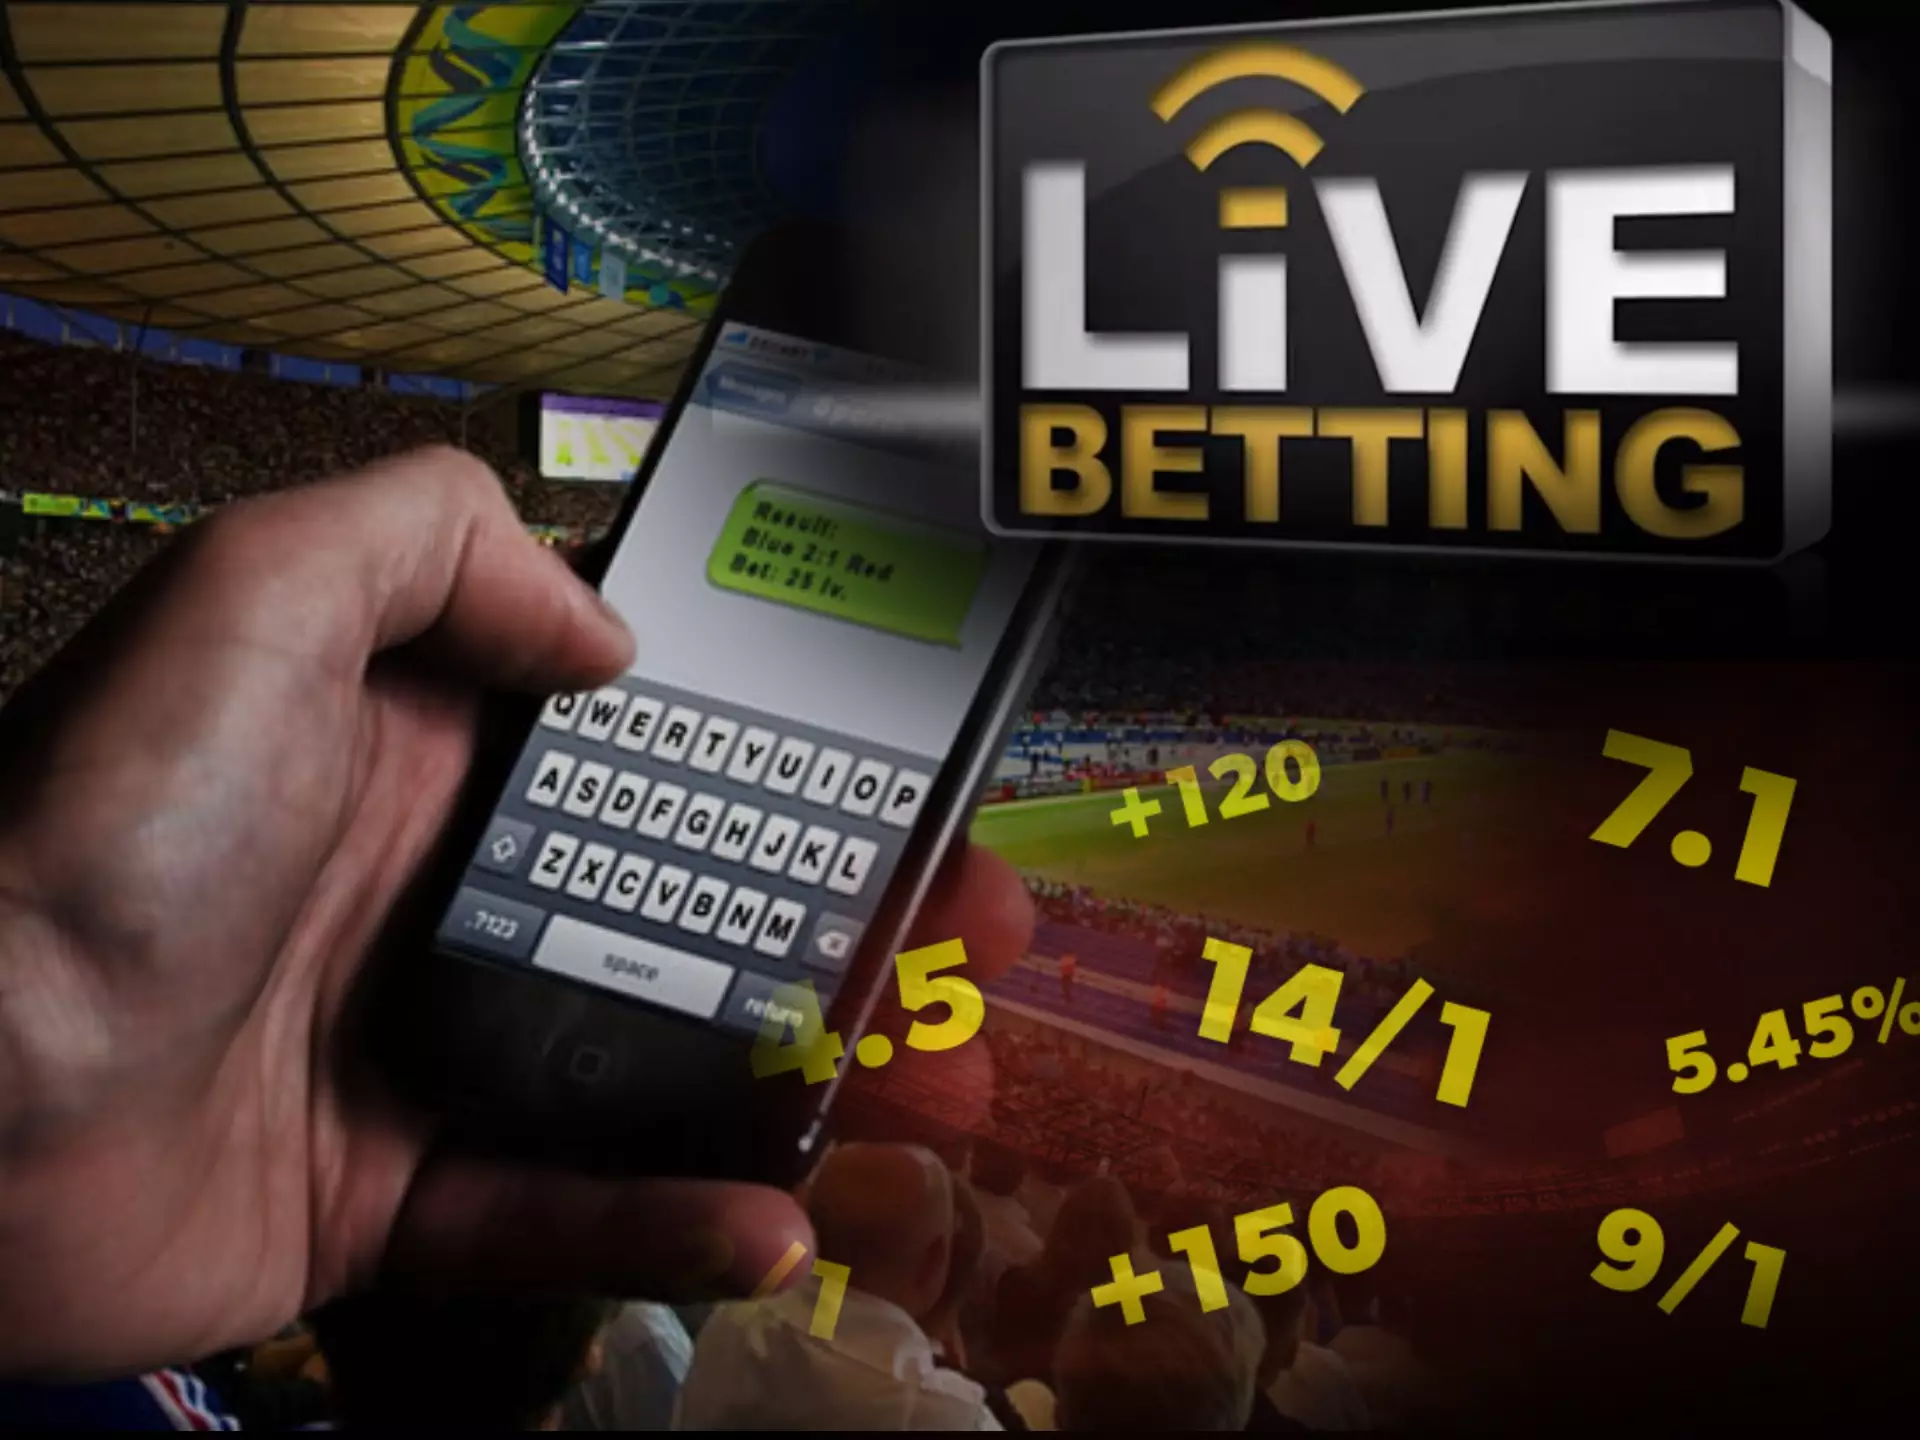 First of all you should study the event and available odds to place a profitable bet.